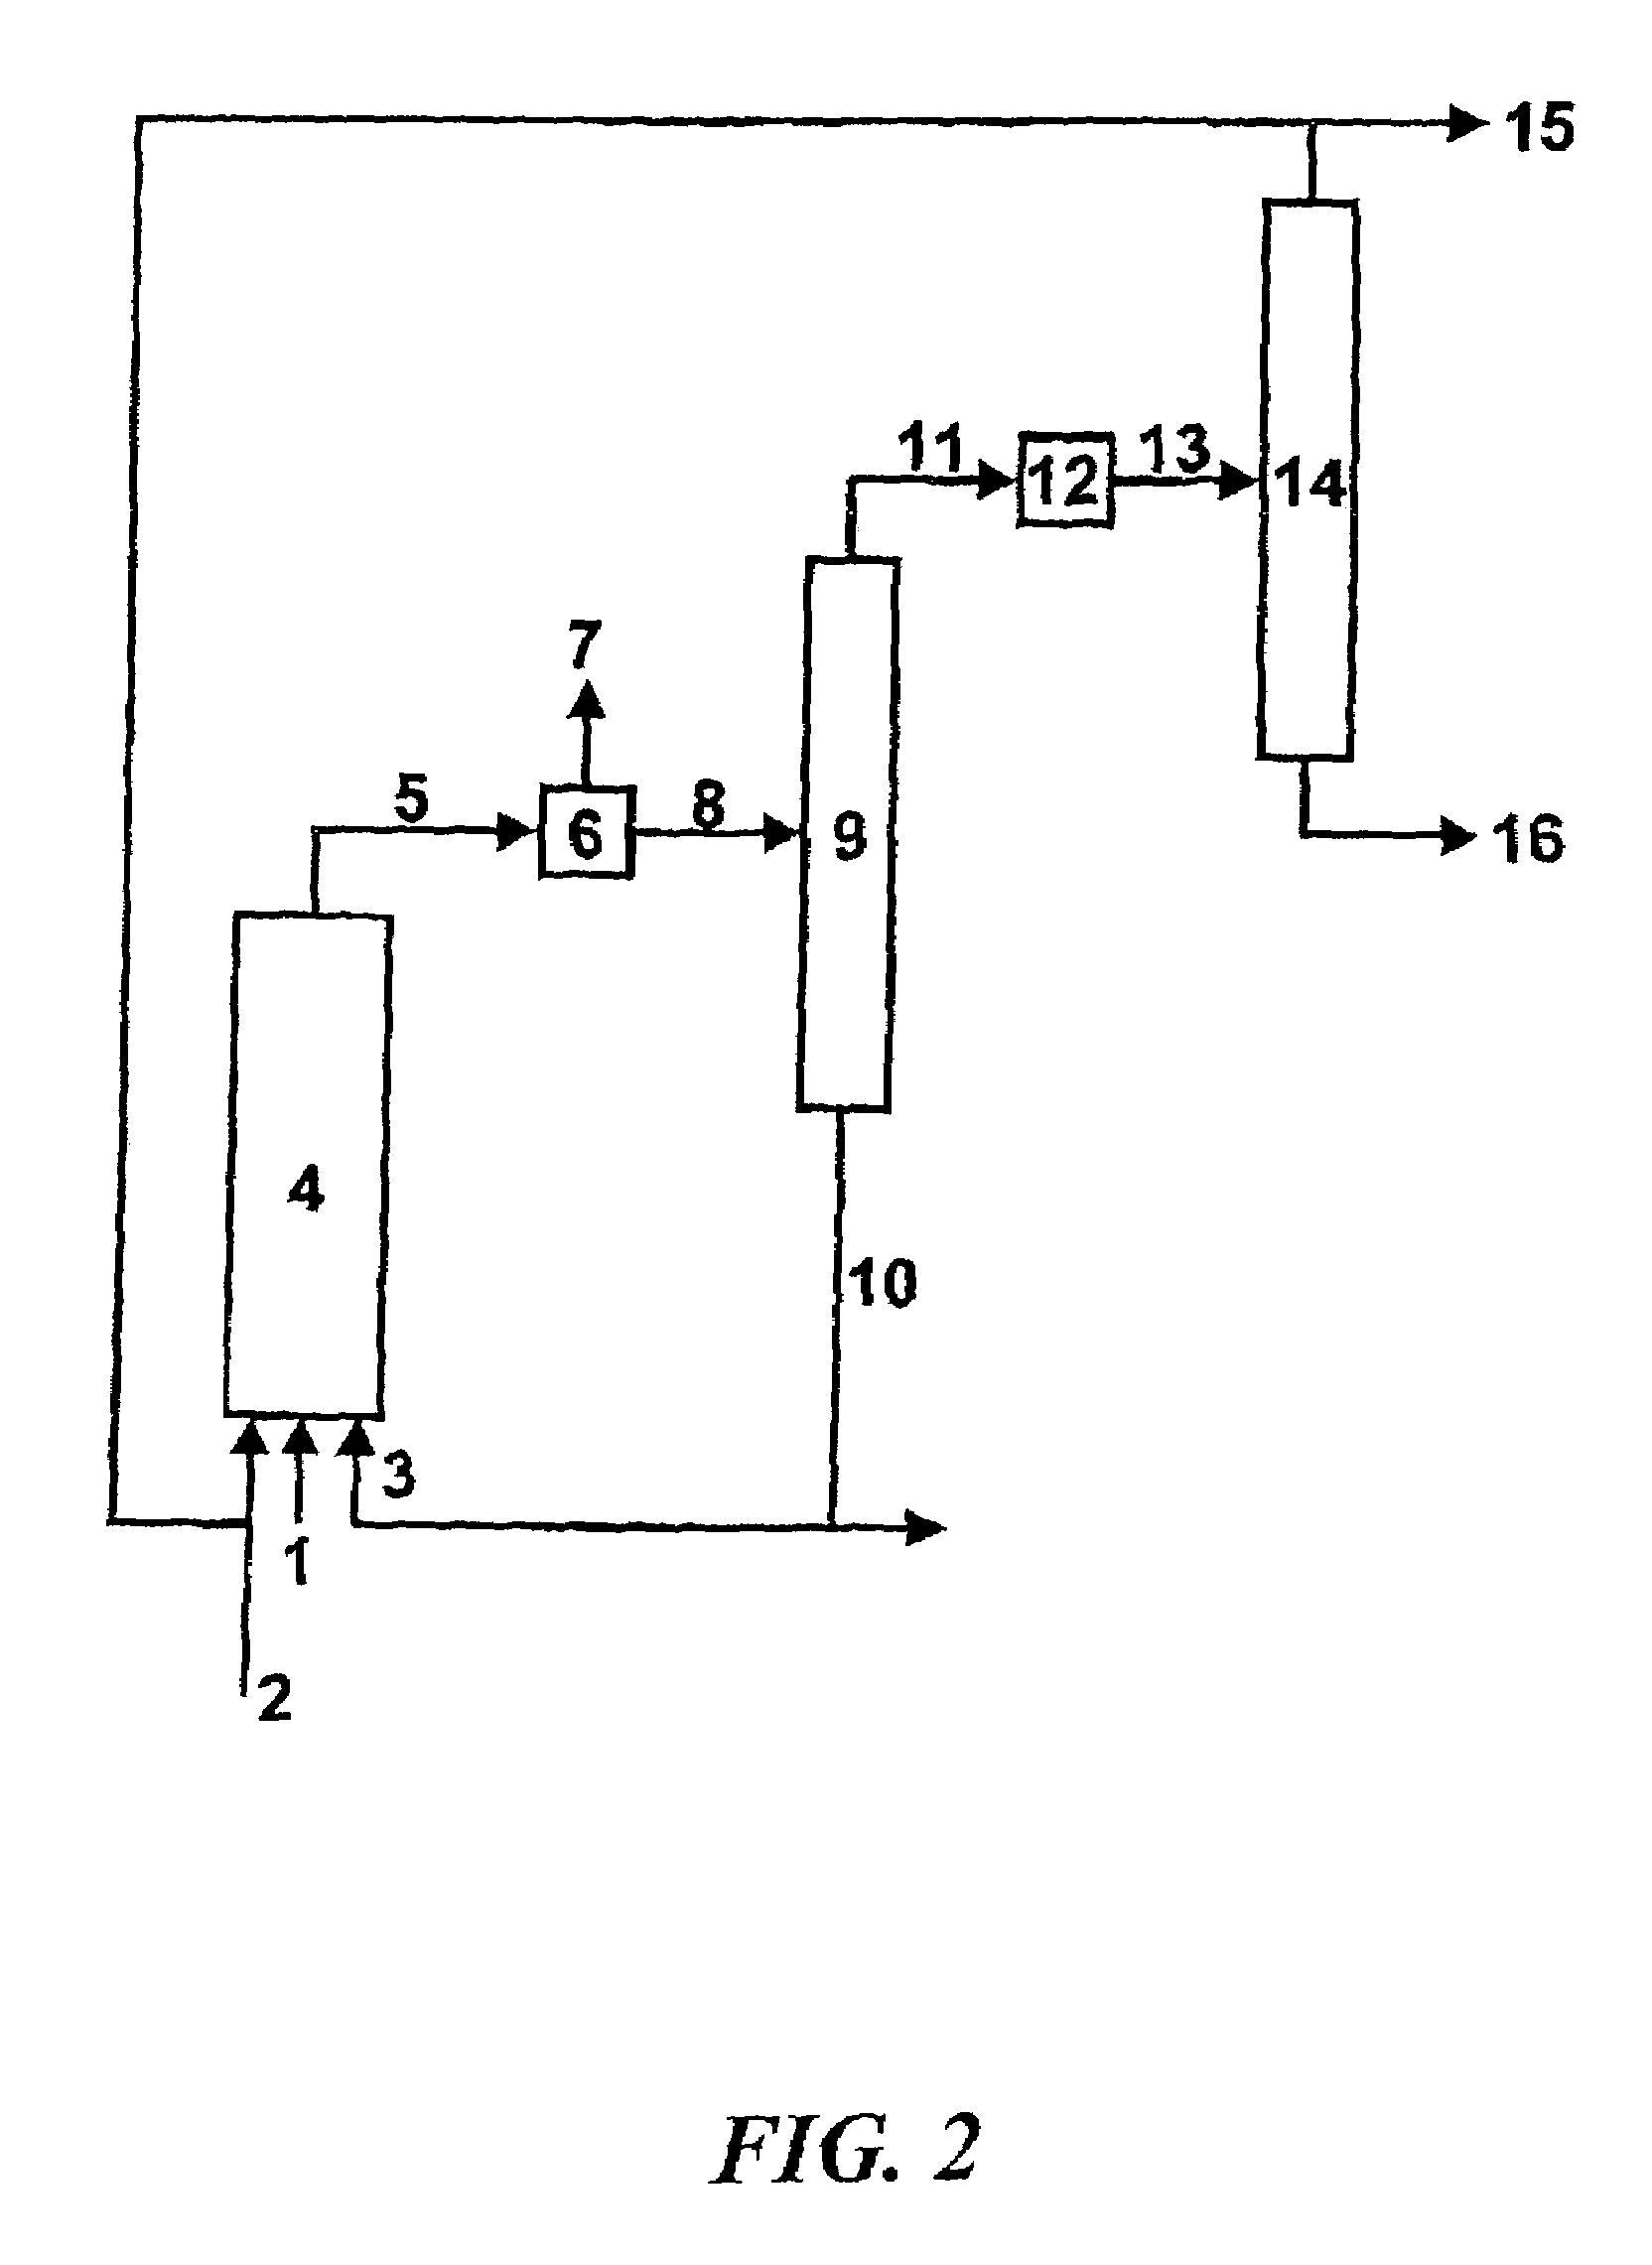 Method for producing aldehydes by means of hydroformylation of olefinically unsaturated compounds, said hydroformylation being catalyzed by unmodified metal complexes in the presence of cyclic carbonic acid esters